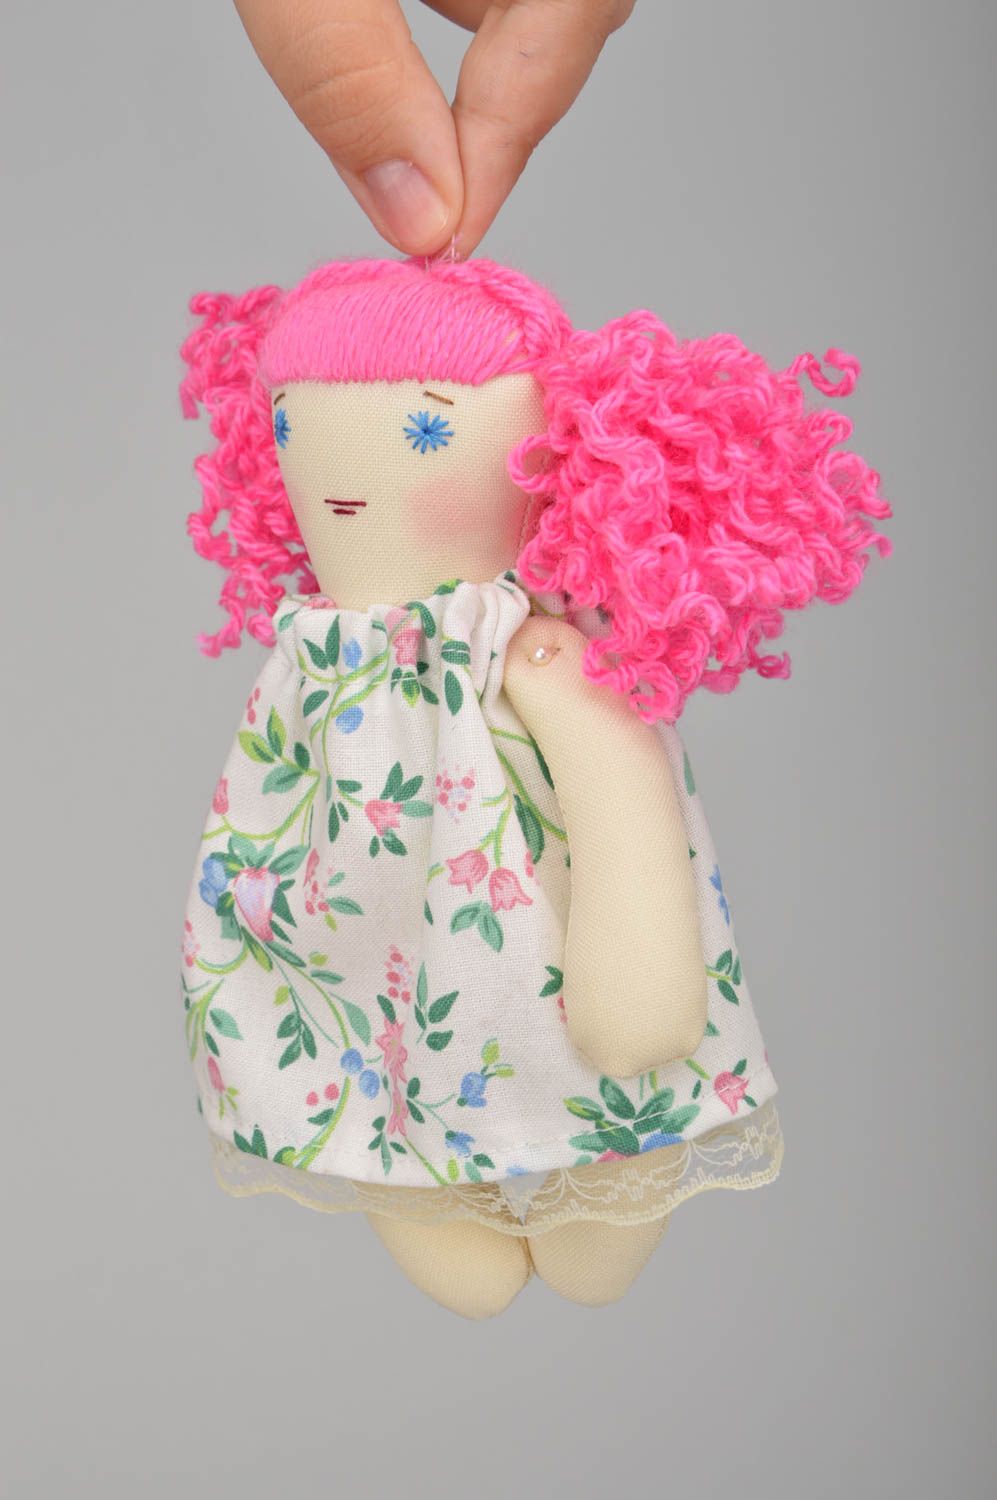 Childrens handmade rag doll fabric soft toy unusual stuffed toy gifts for kids photo 3